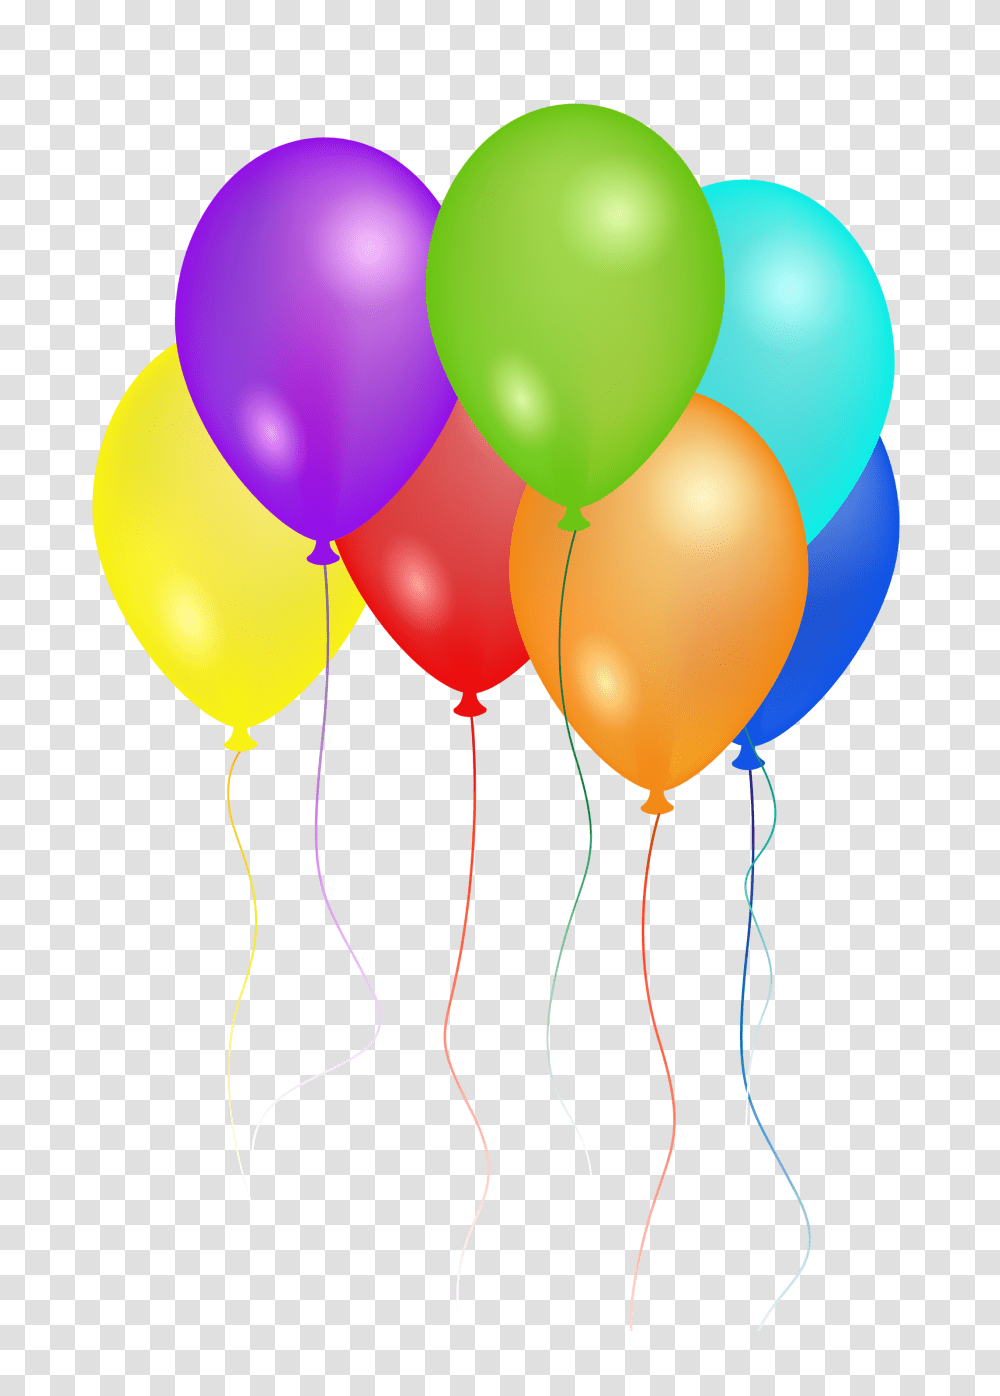 Cliparts Balloons Decorations Clipart Yespressinfo Background Birthday Balloons Transparent Png